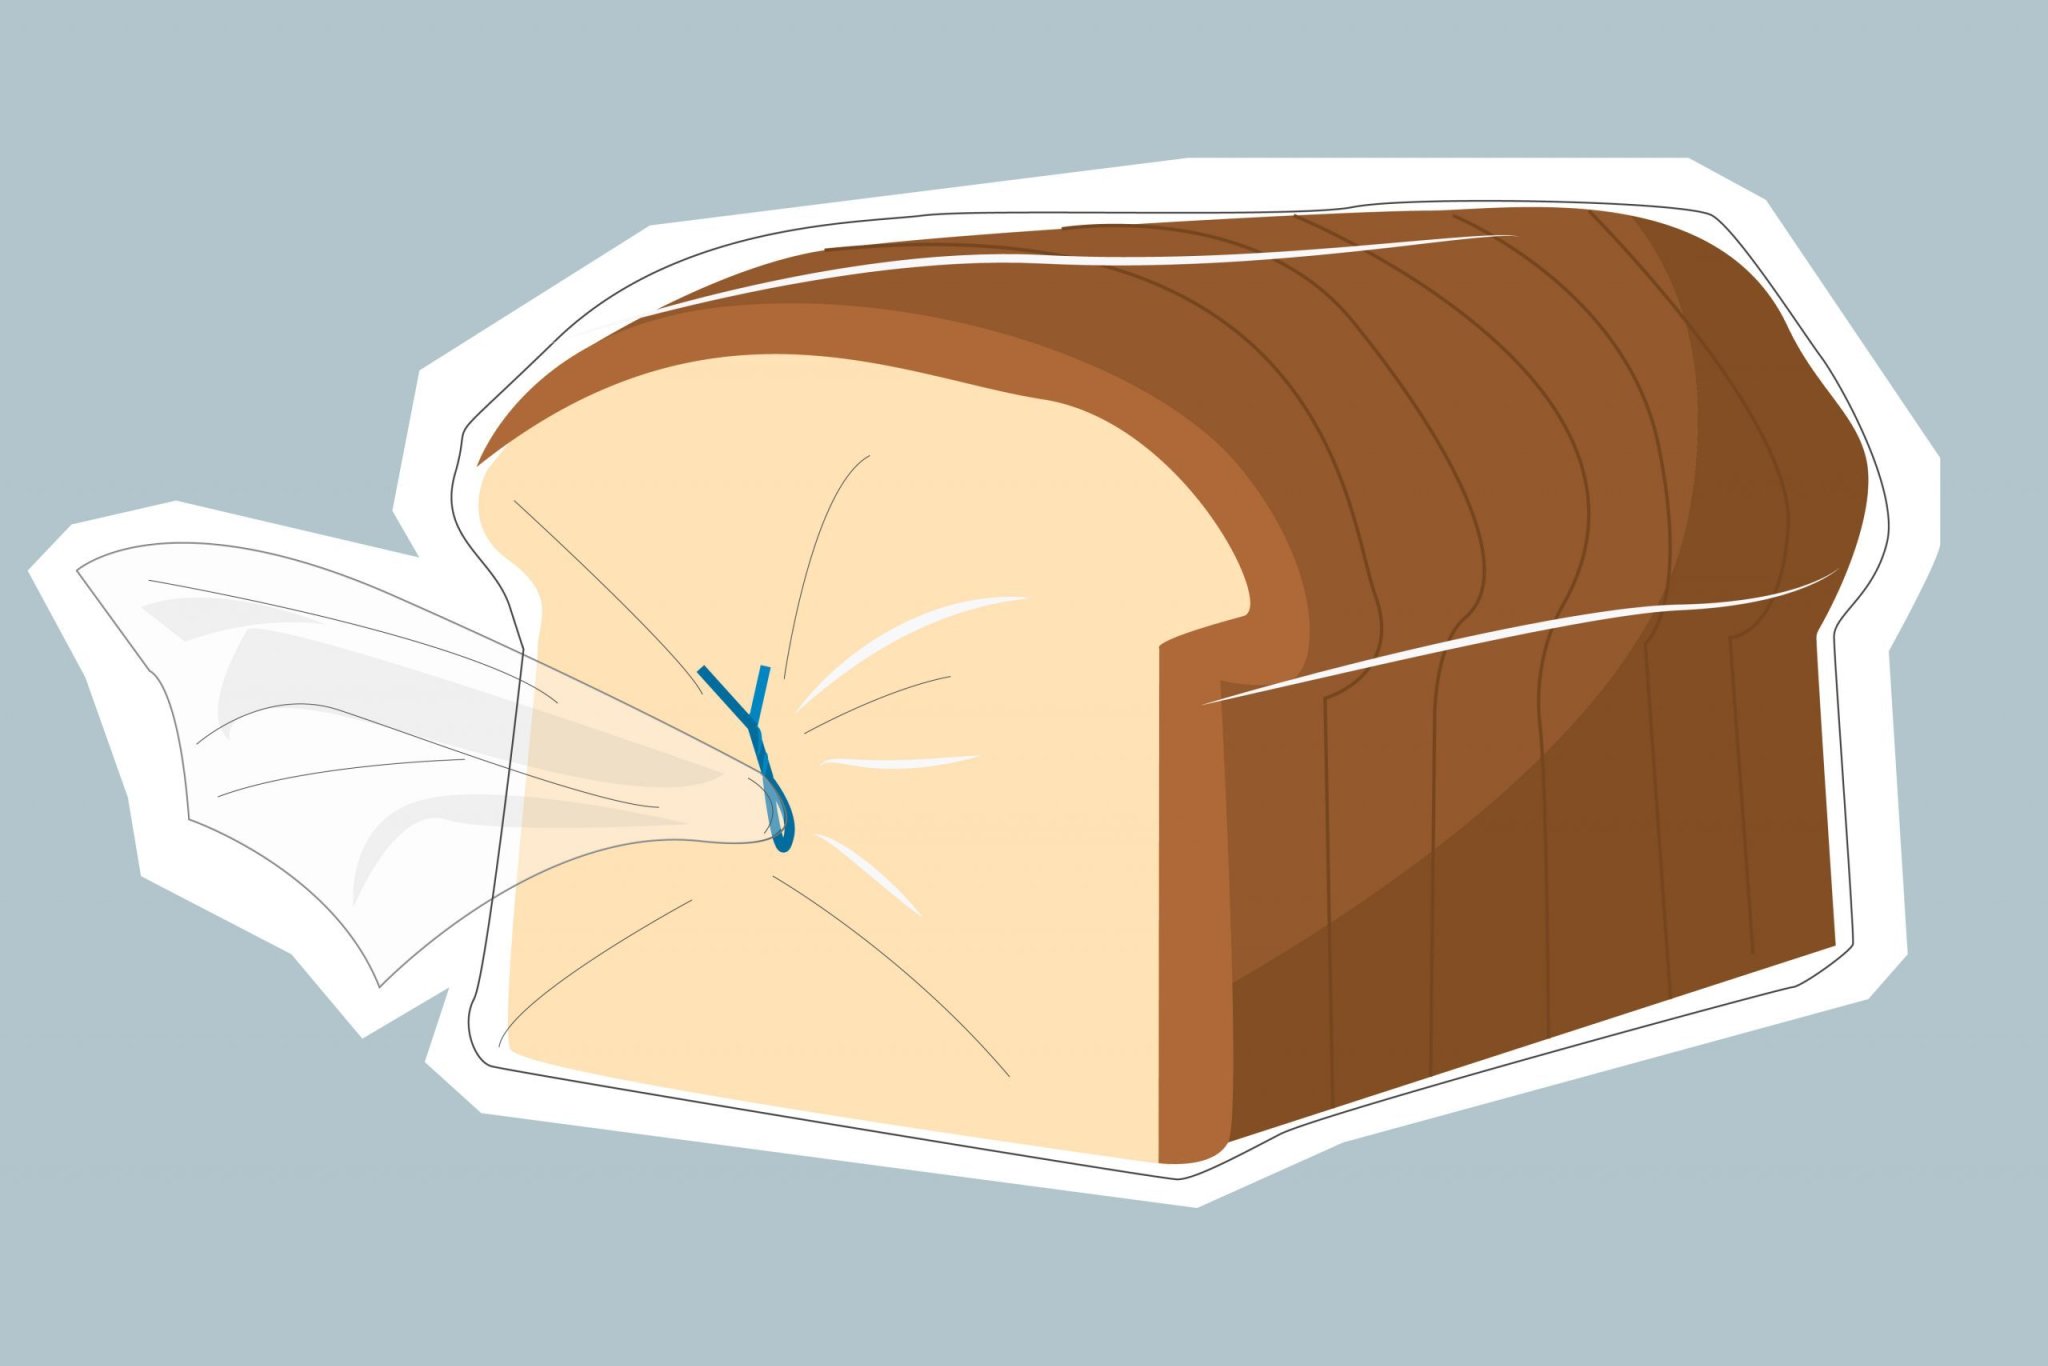 If You See a Blue Twist Tie on Your Bread Bag, This Is What It Means